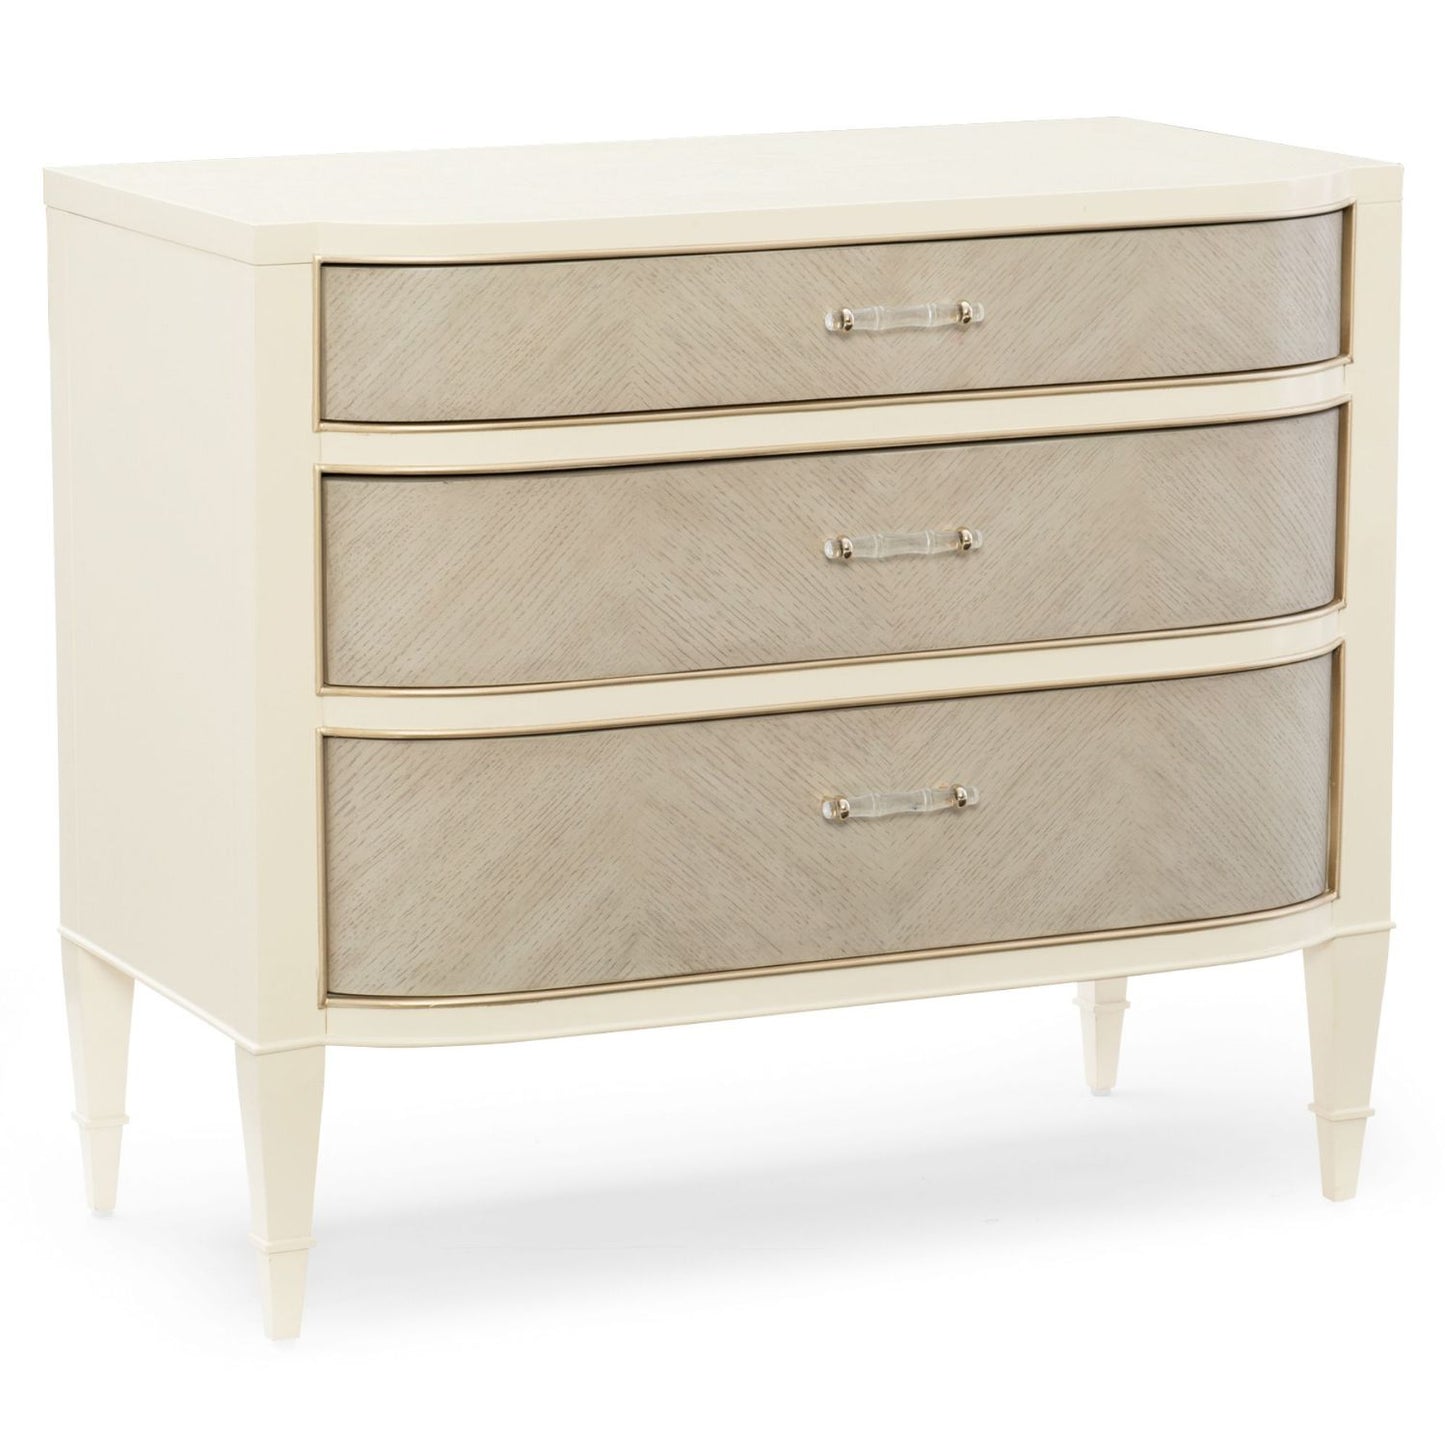 Caracole Classic Dress Code Bedside Table